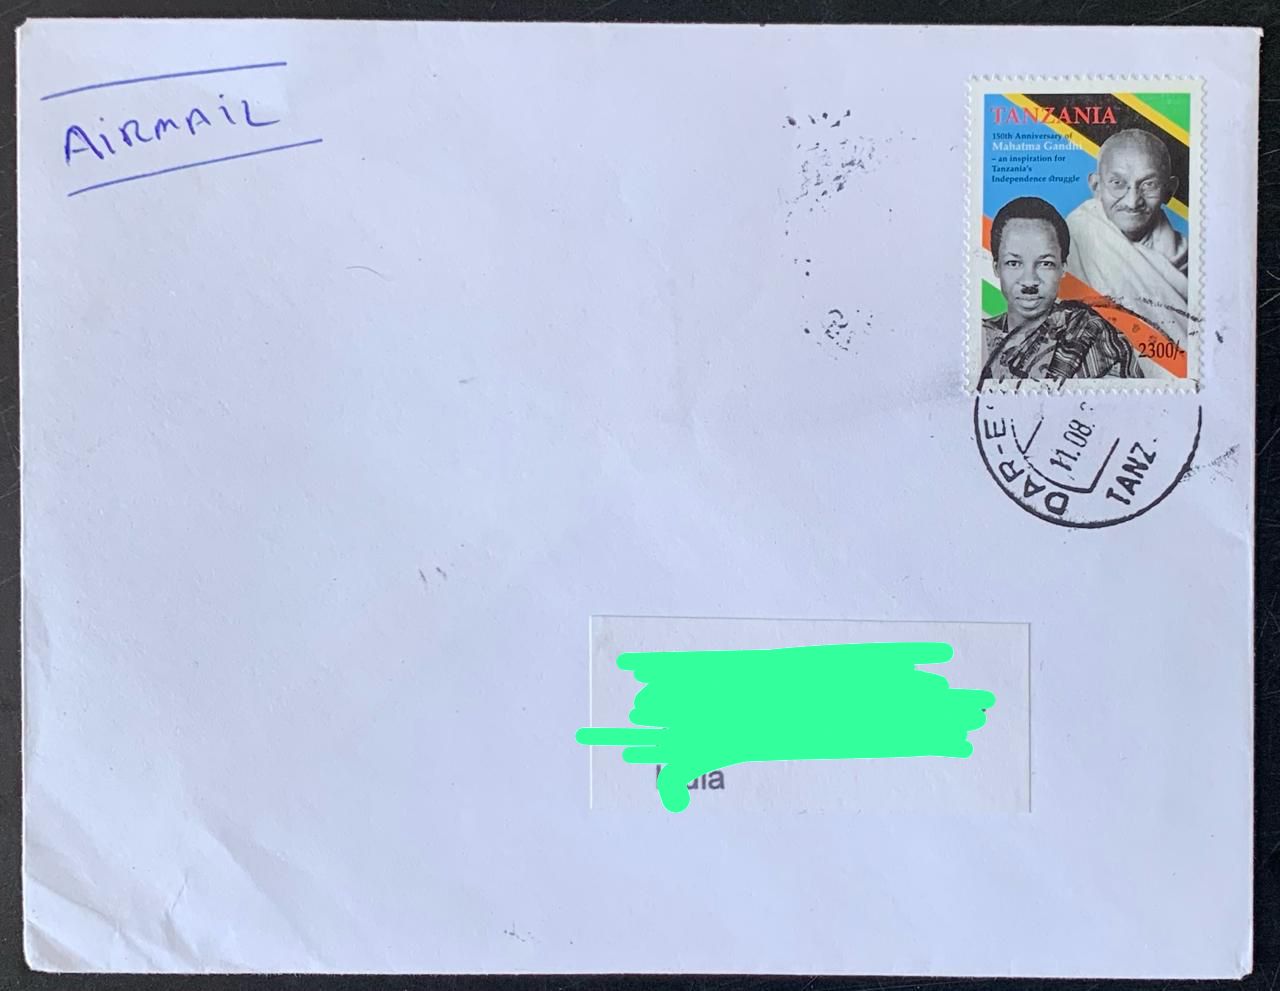 Tanzania 2019 Mahatma Gandhi Stamp used Commercially on Cover with dely cancellation on back